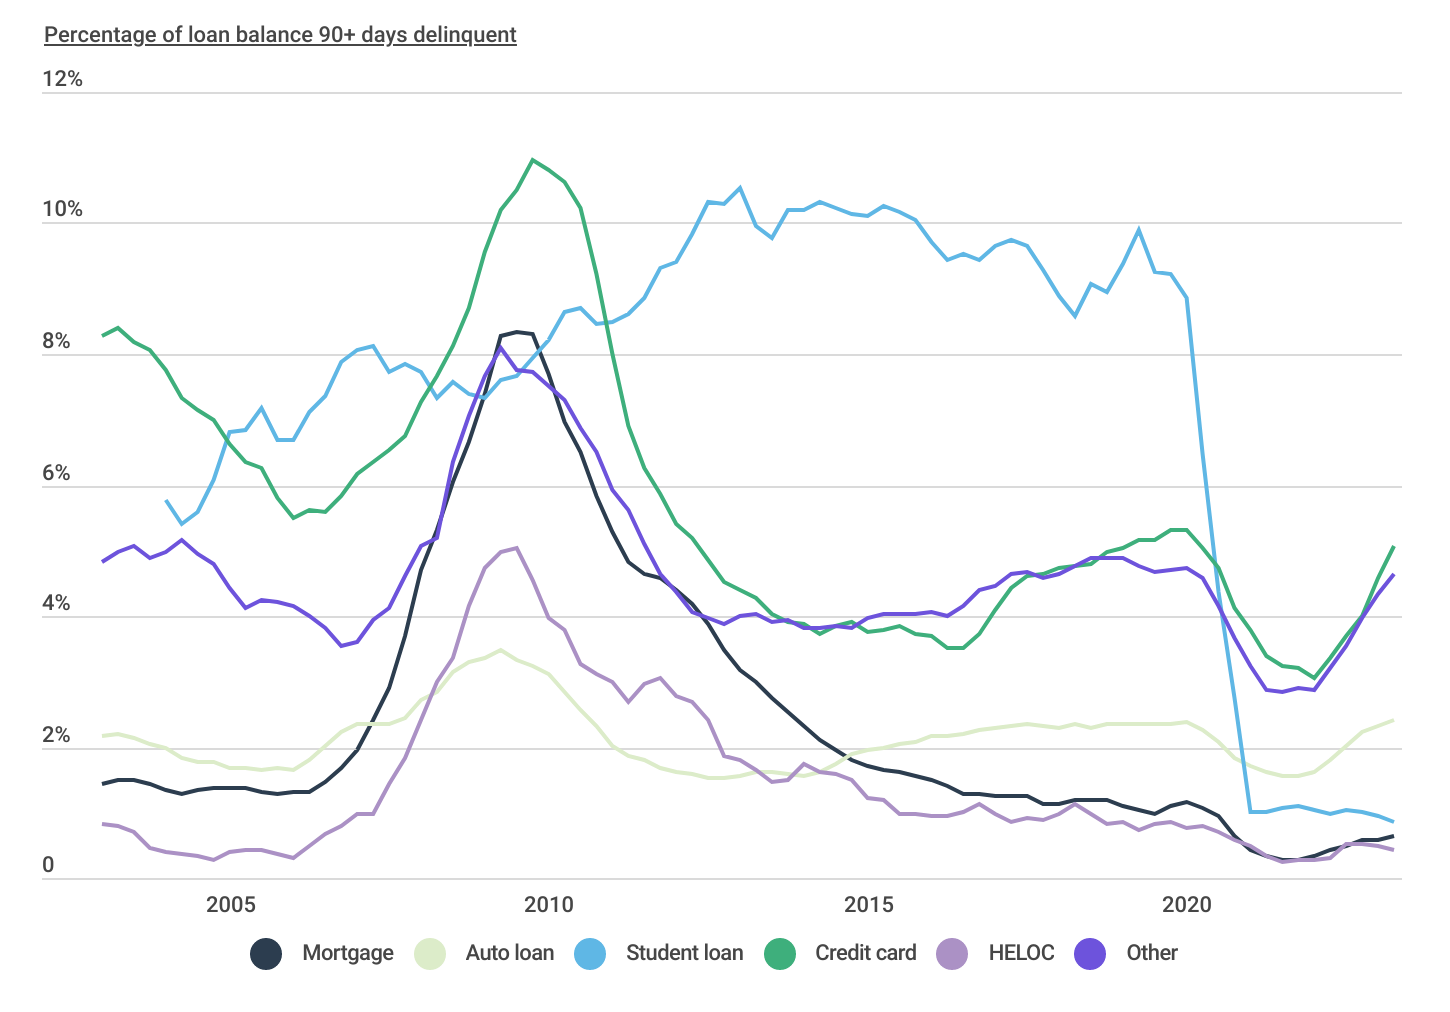 Mortgage delinquencies remain at historically low levels